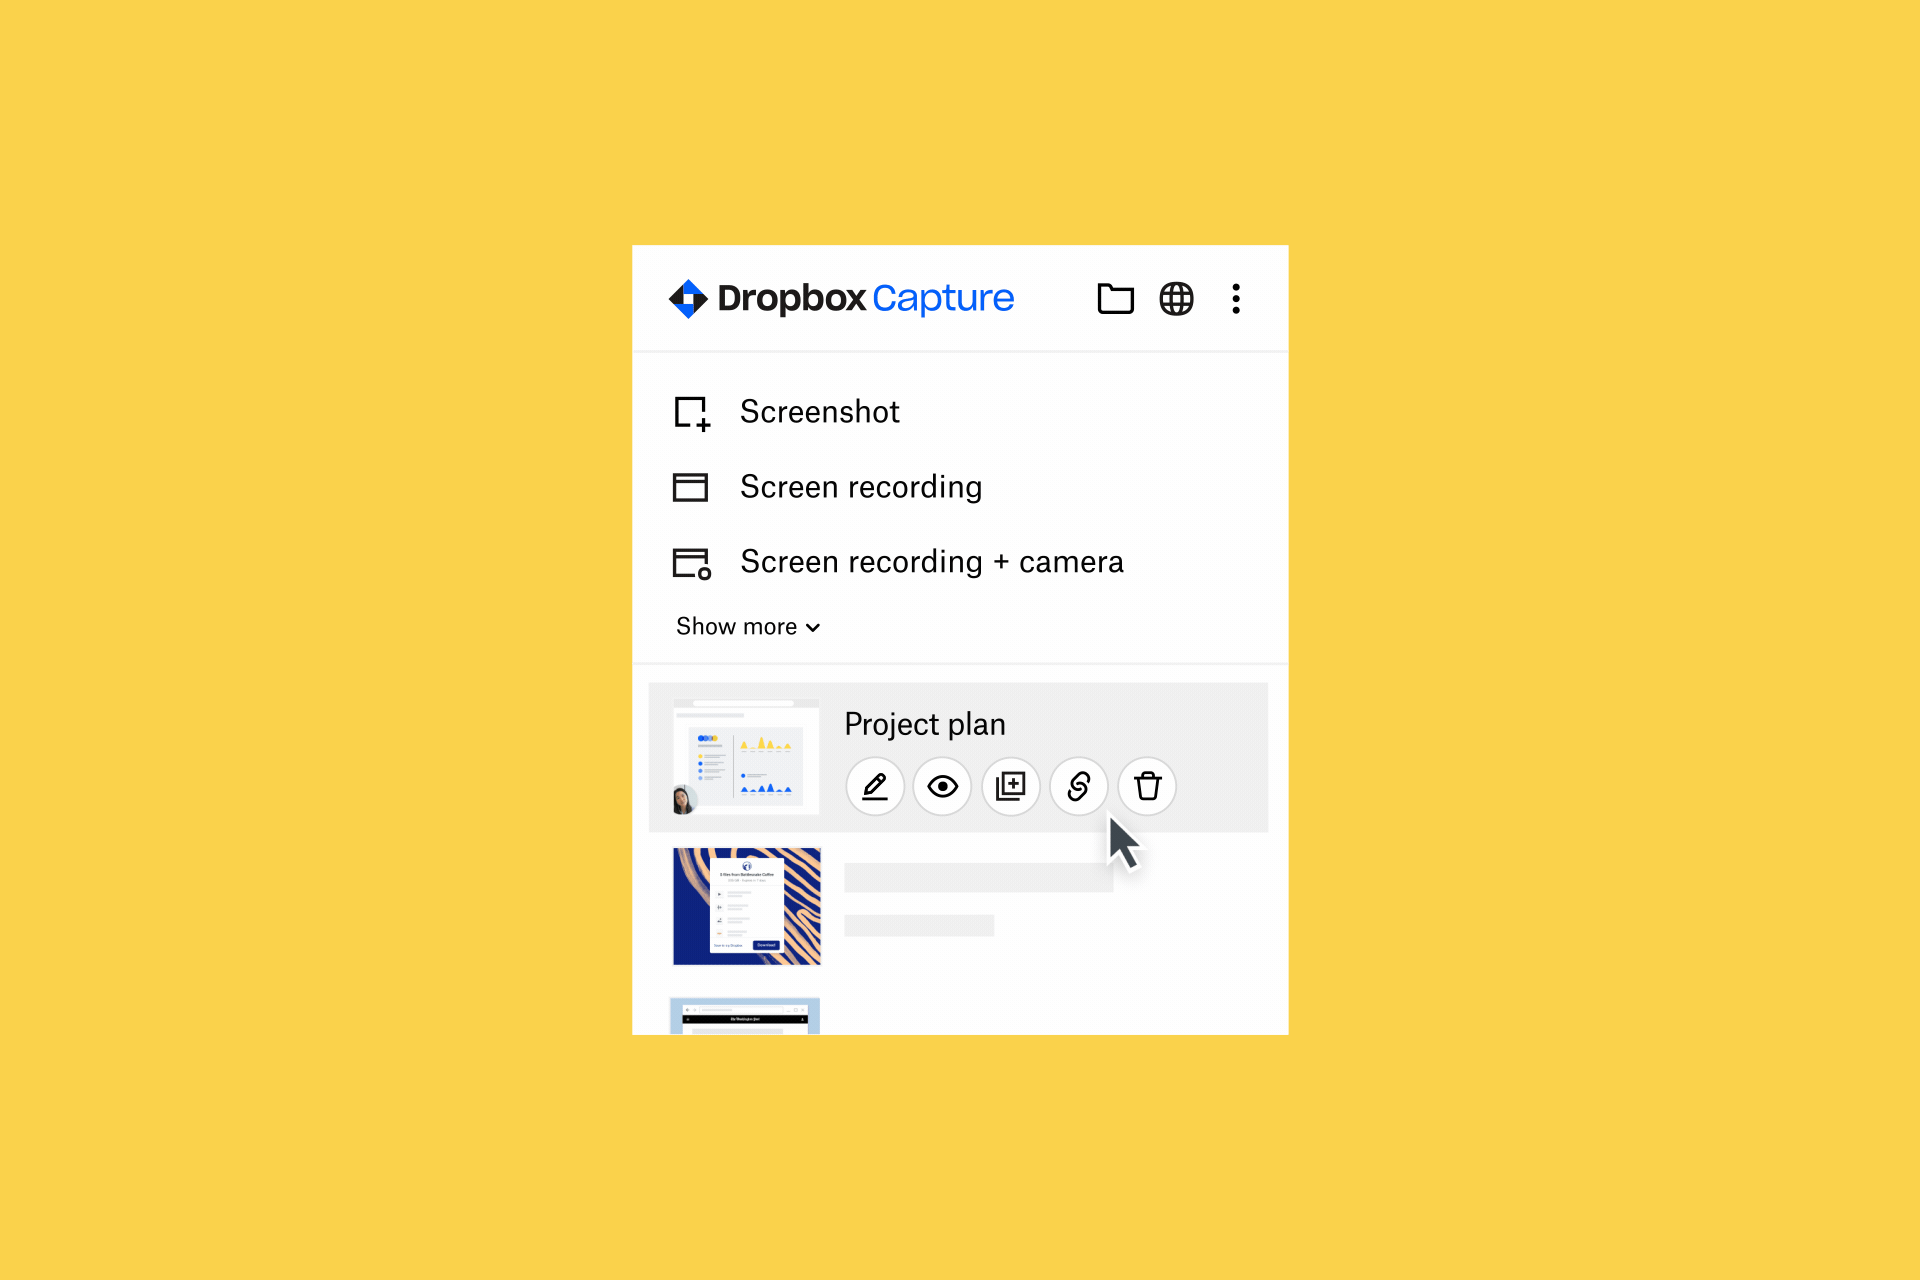 An animated GIF demonstrating the menu tray for Dropbox Capture and the screen capture options available